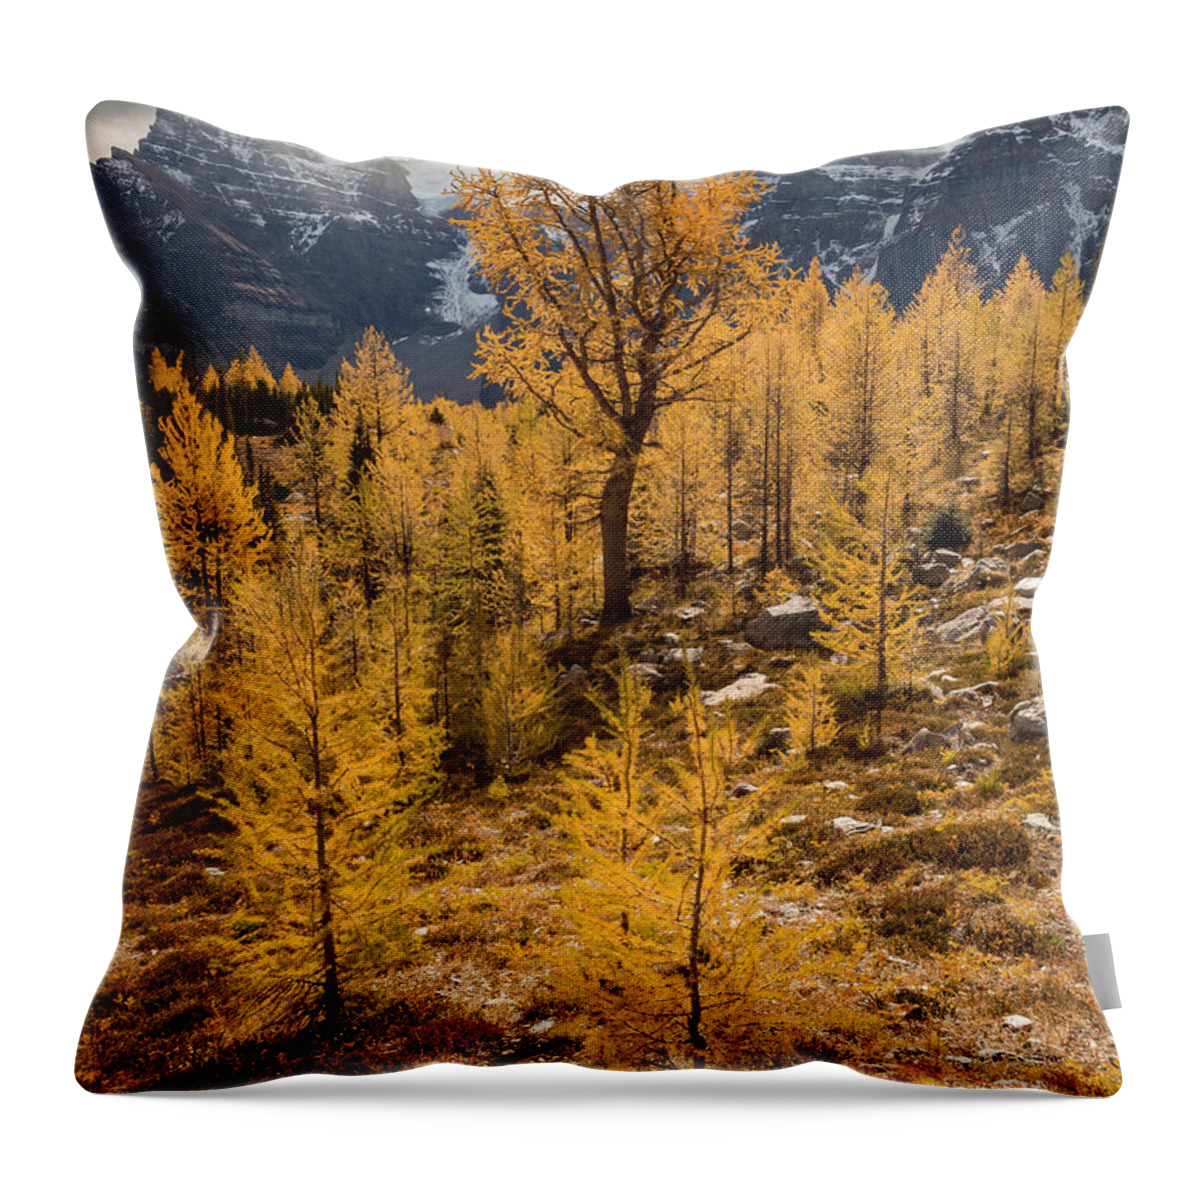 Larches Throw Pillow featuring the photograph Larch Family by Emily Dickey